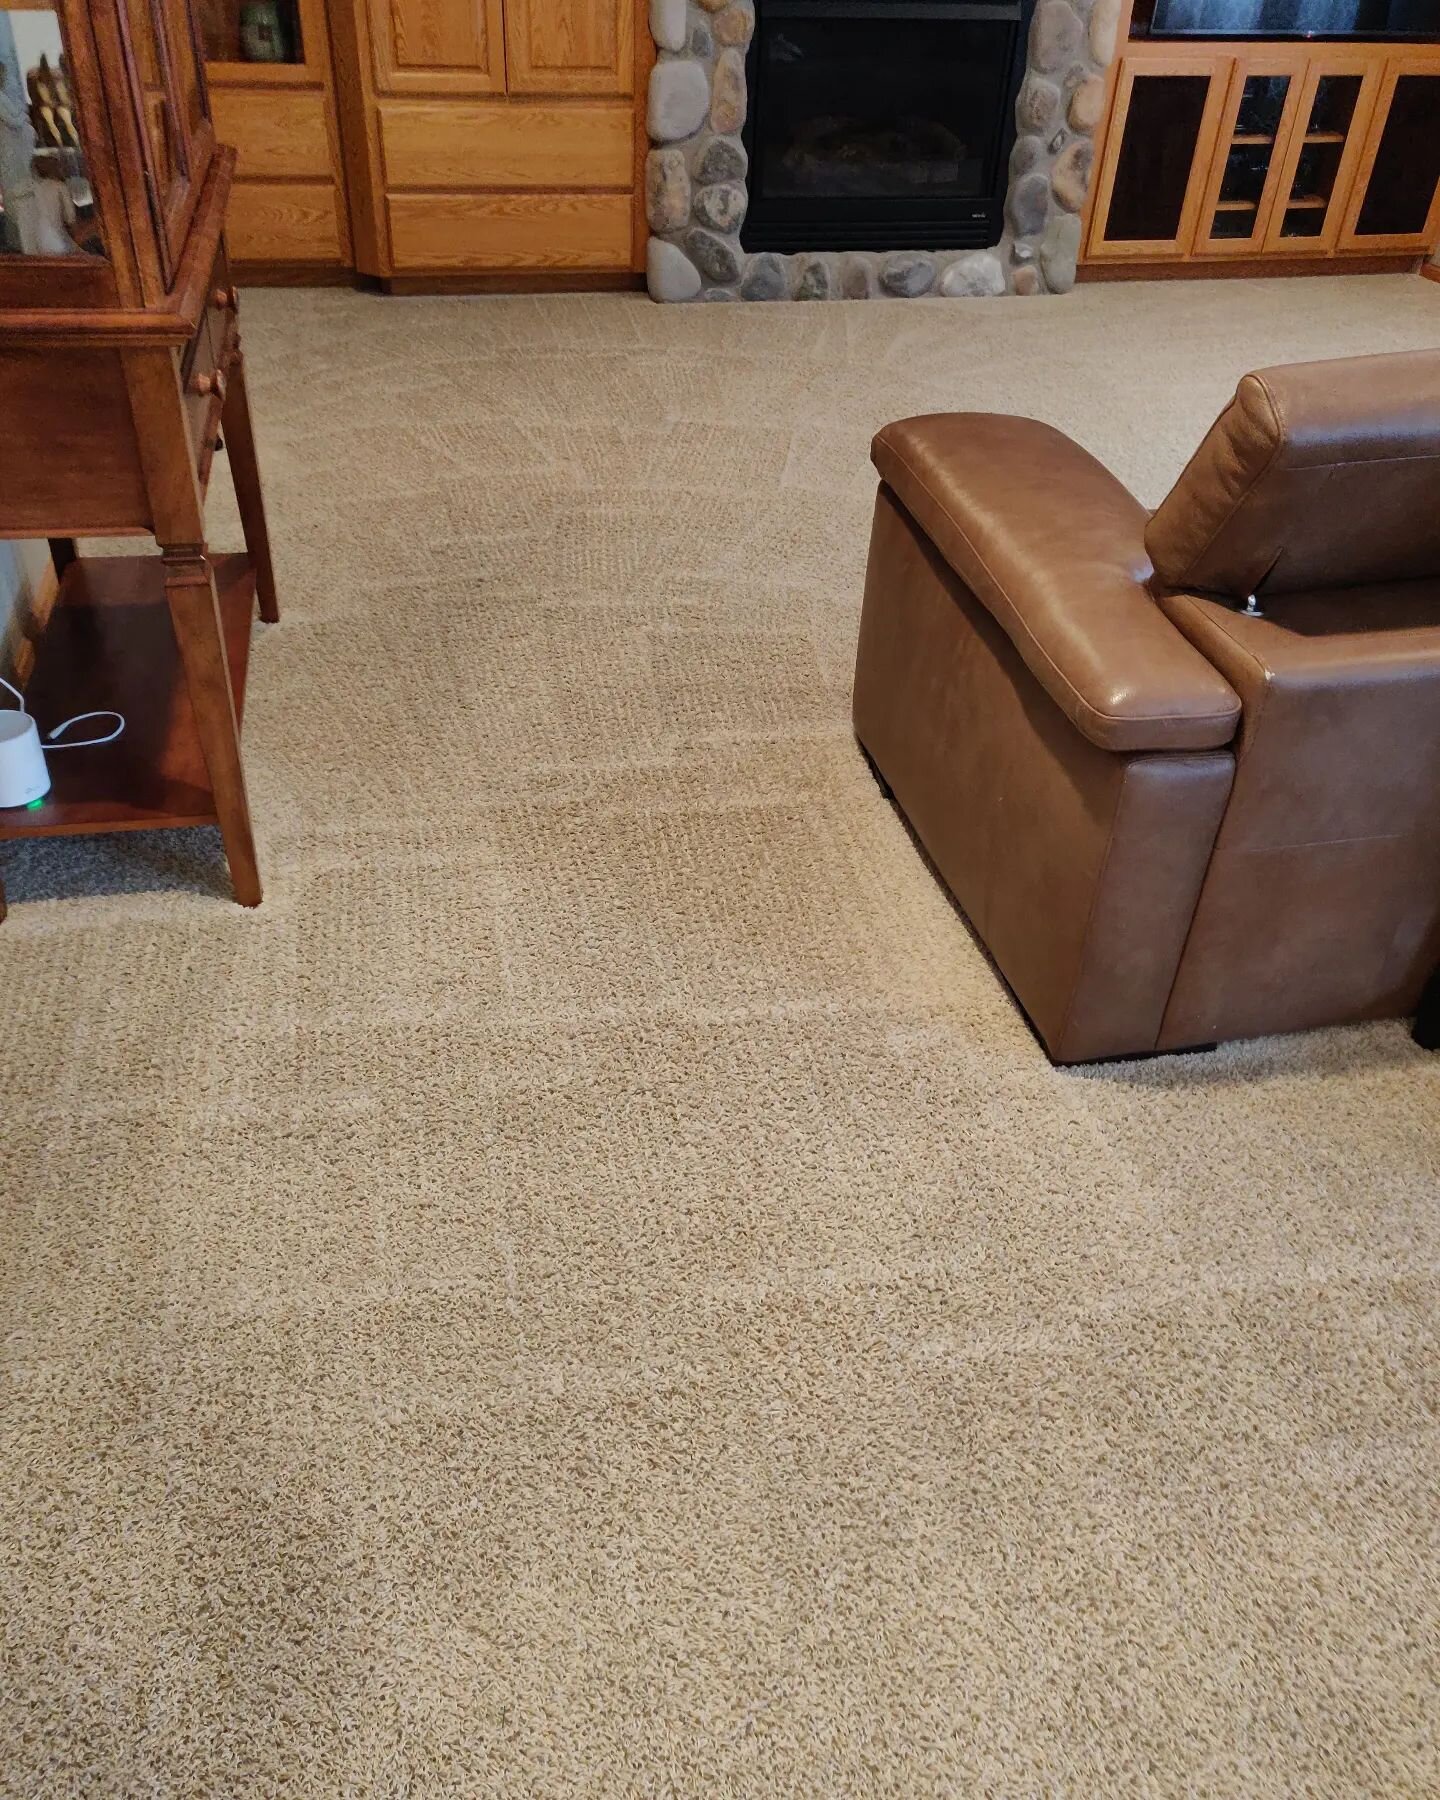 Professional carpet cleaning brings your carpet back to life. Call AJ Steam Cleaning to schedule your appointment. 952-447-4630